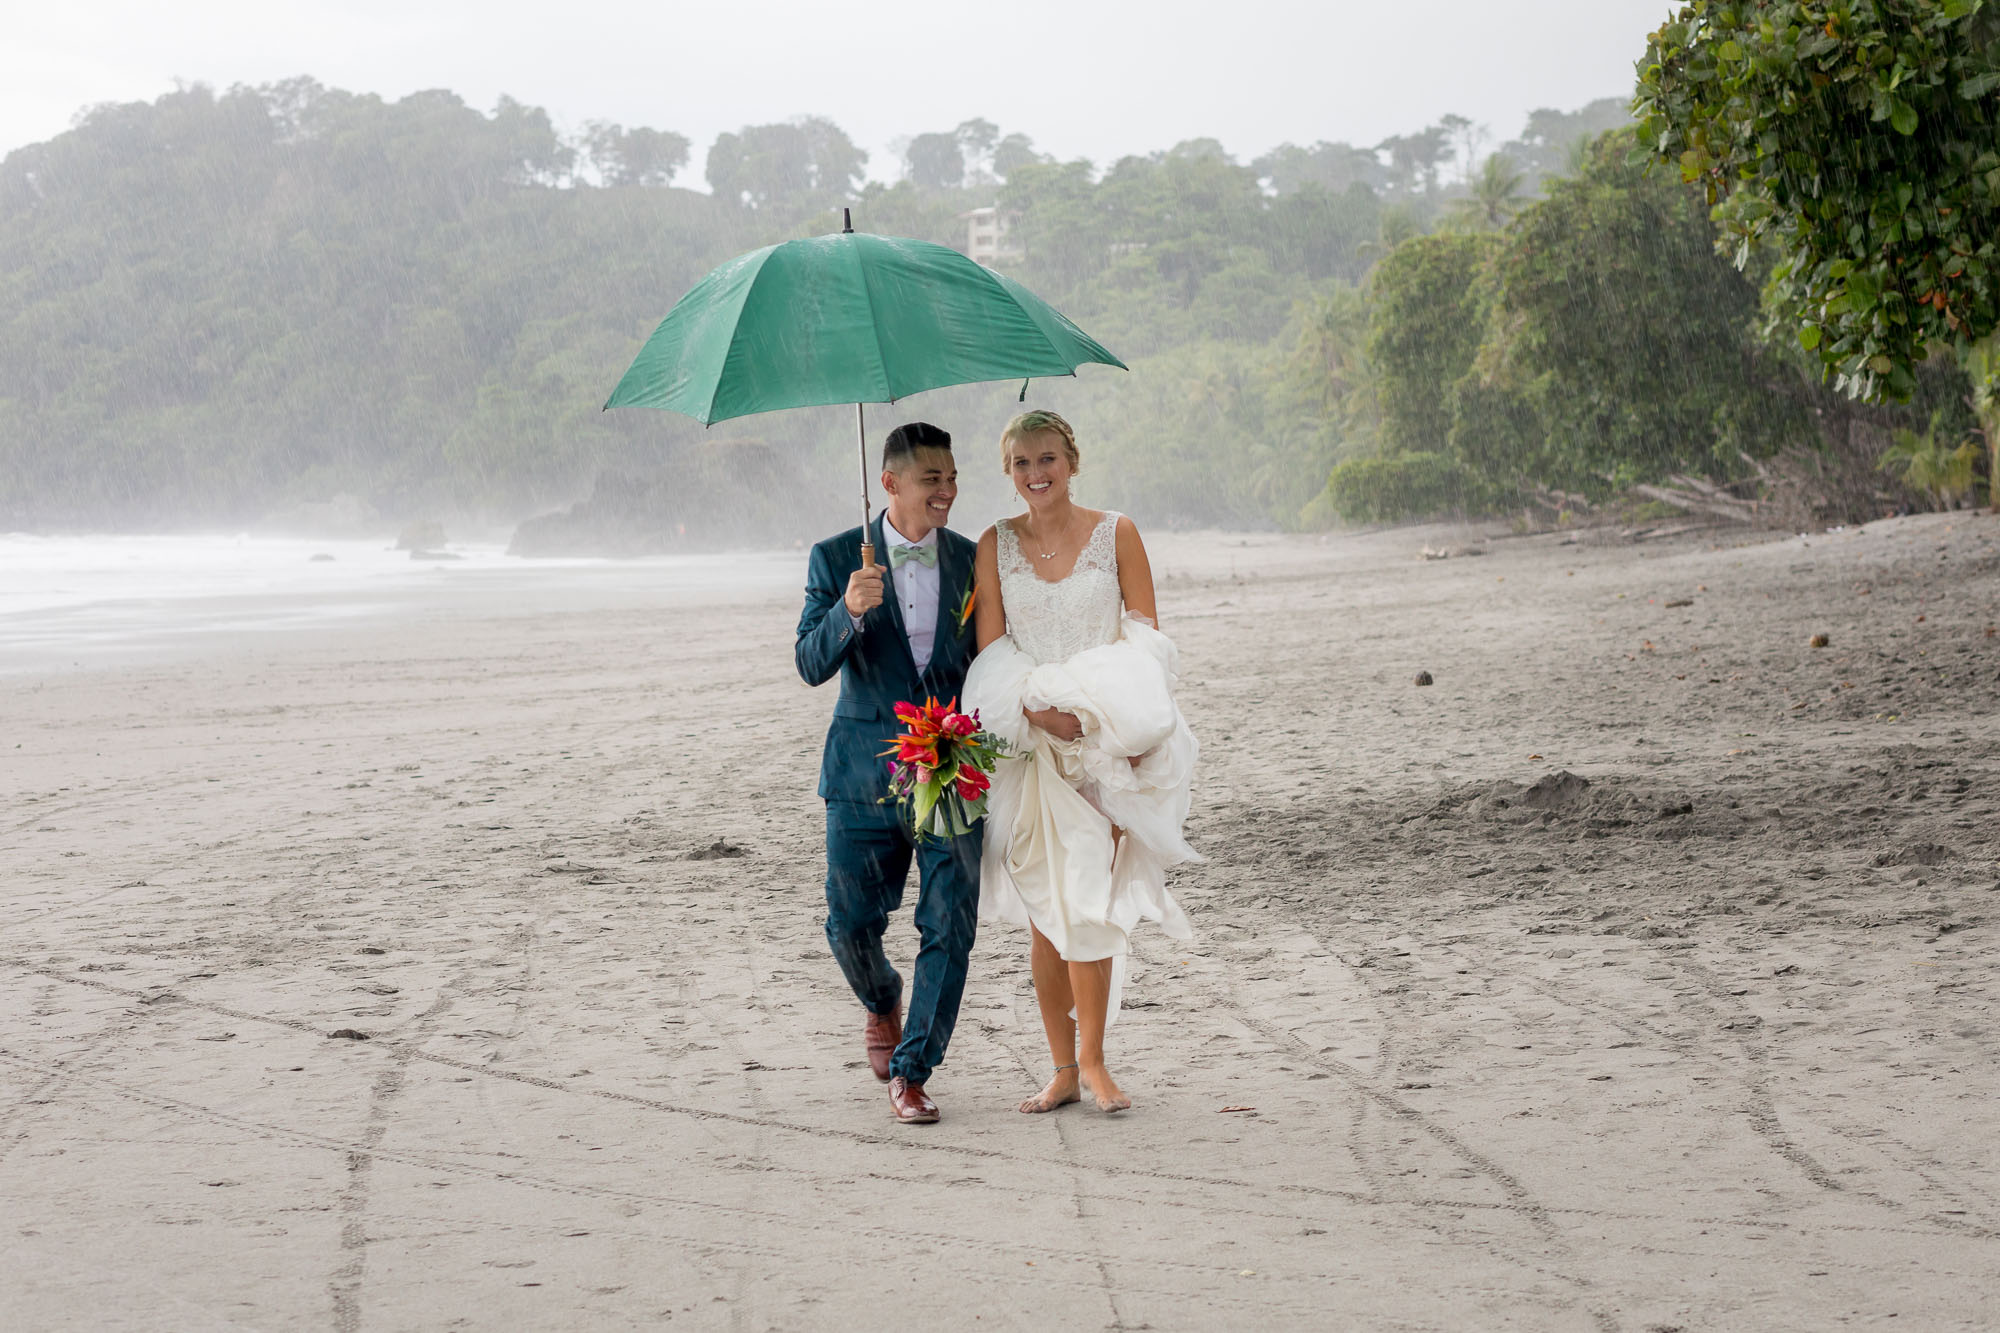 Bridal portraits after the church wedding ceremony on the beach